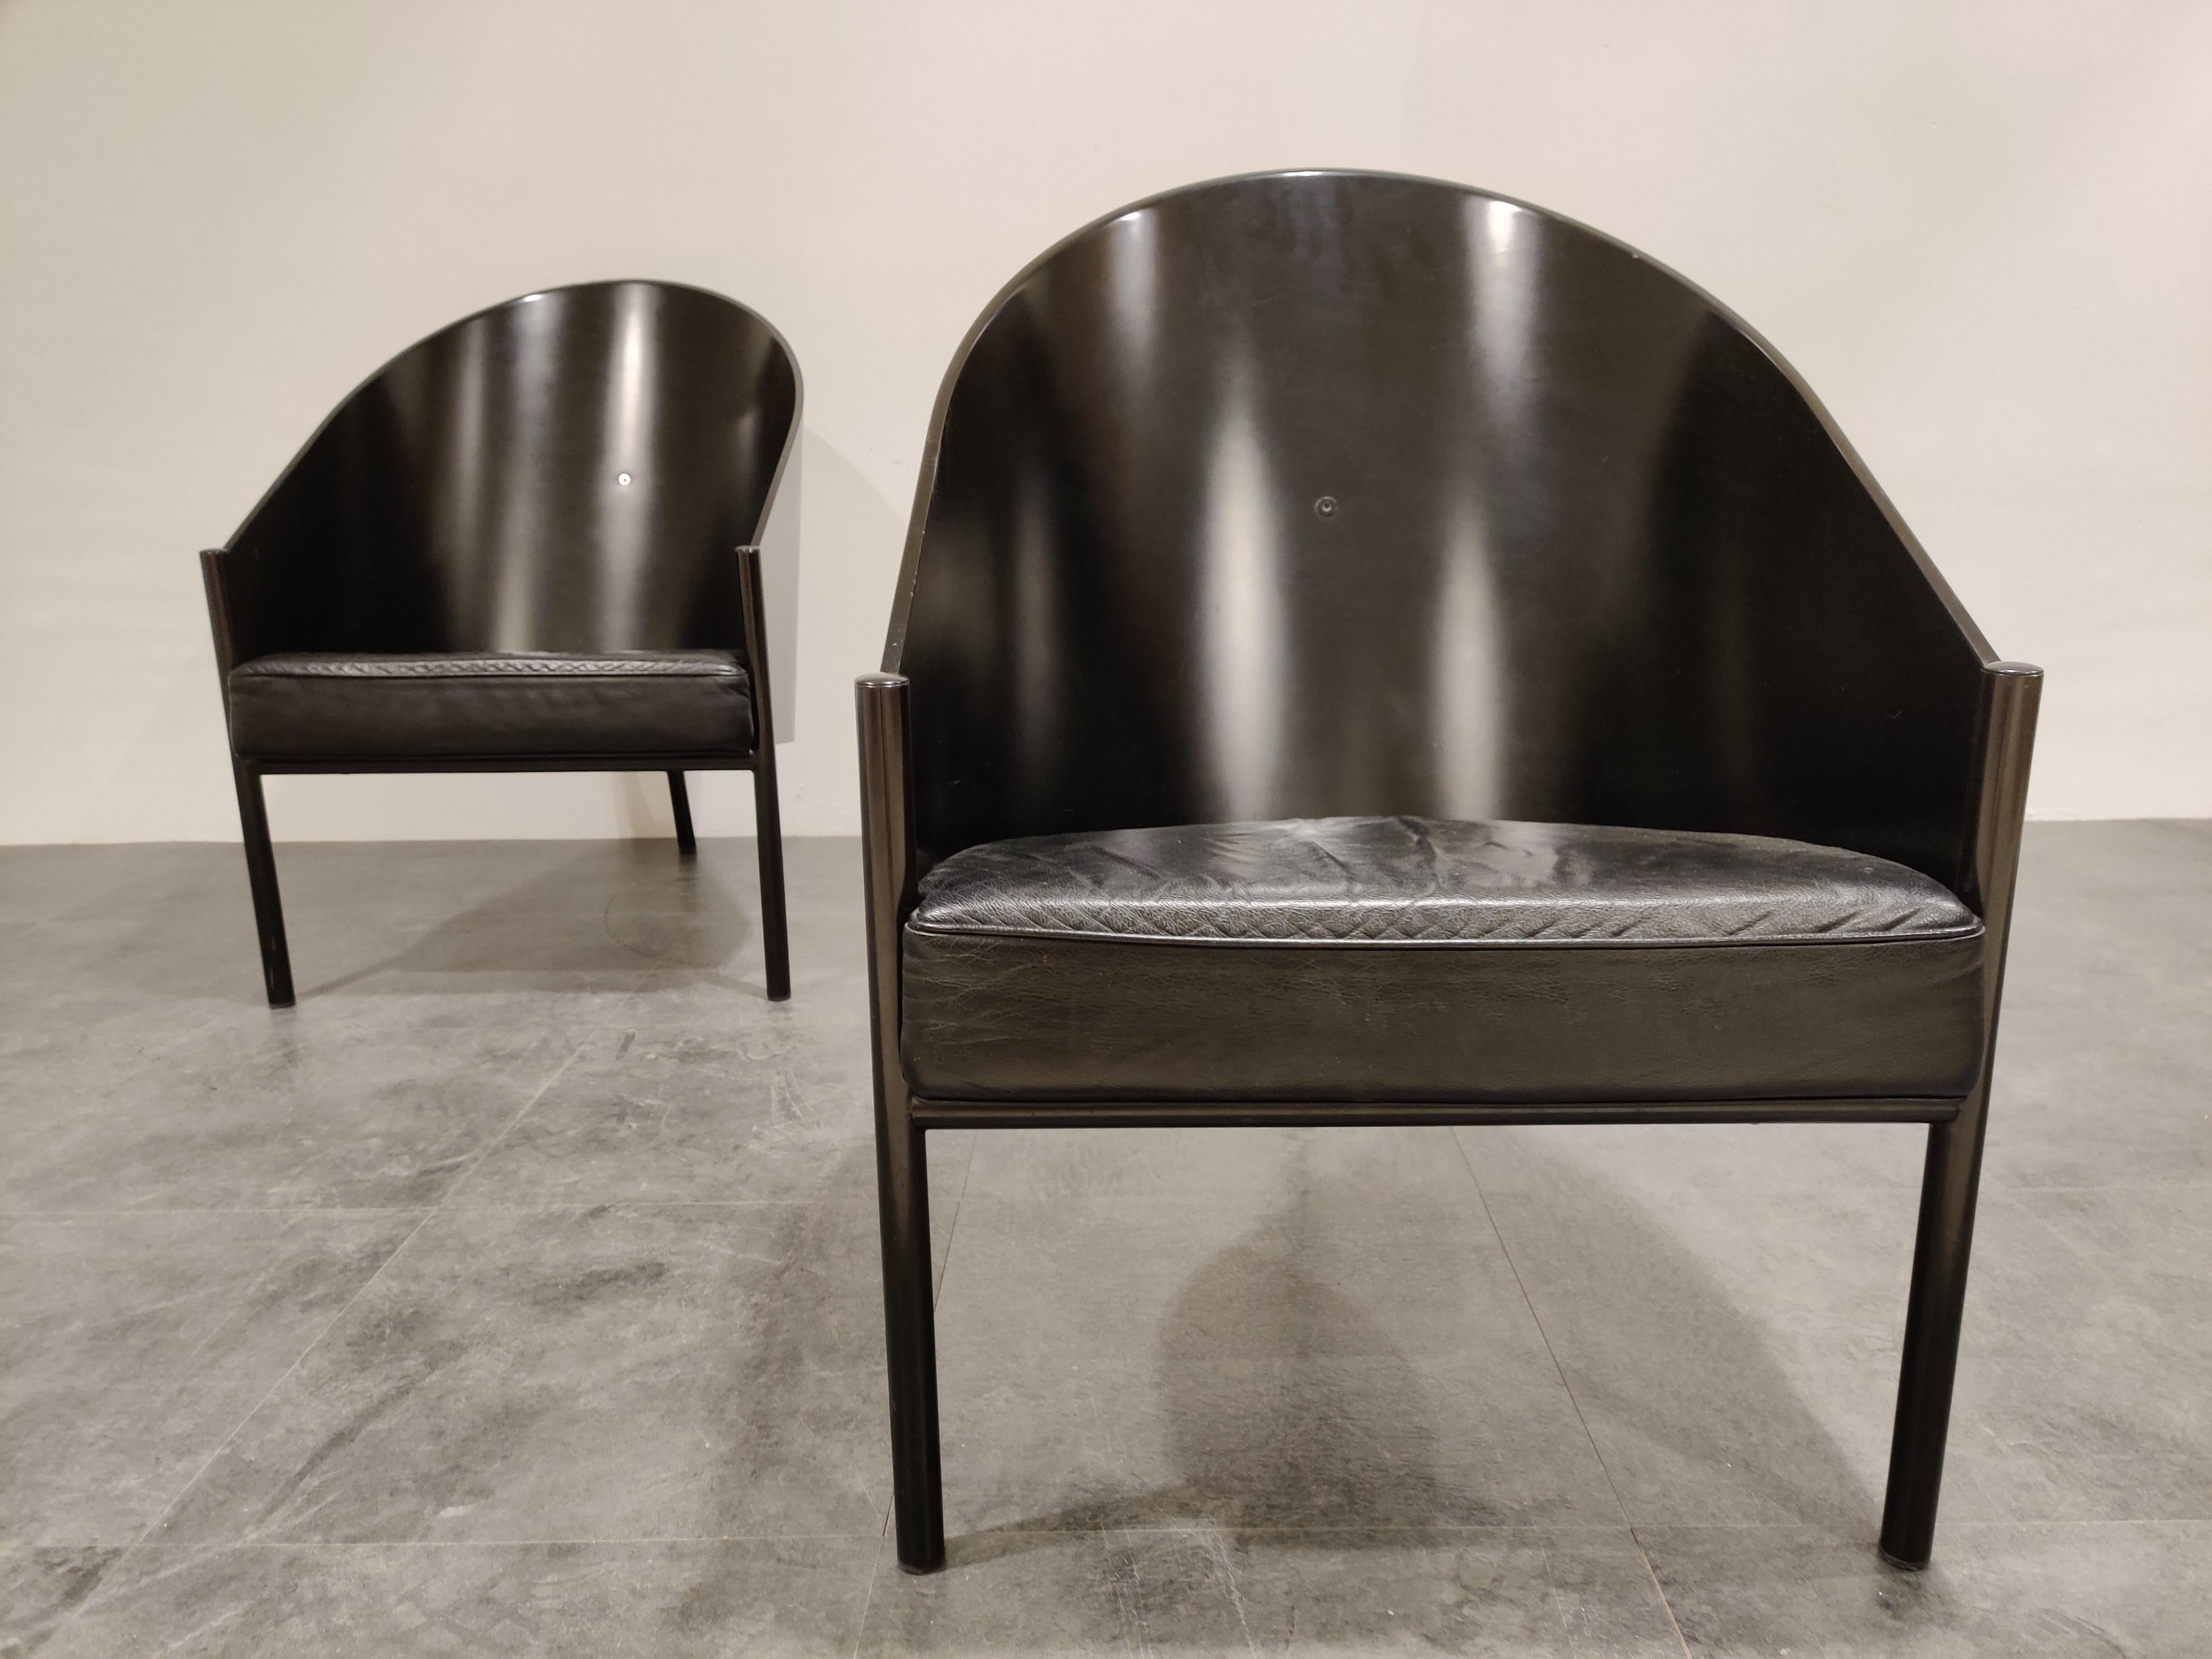 Leather Pair of Vintage Pratfall Chairs by Philippe Starck for Driade, 1982